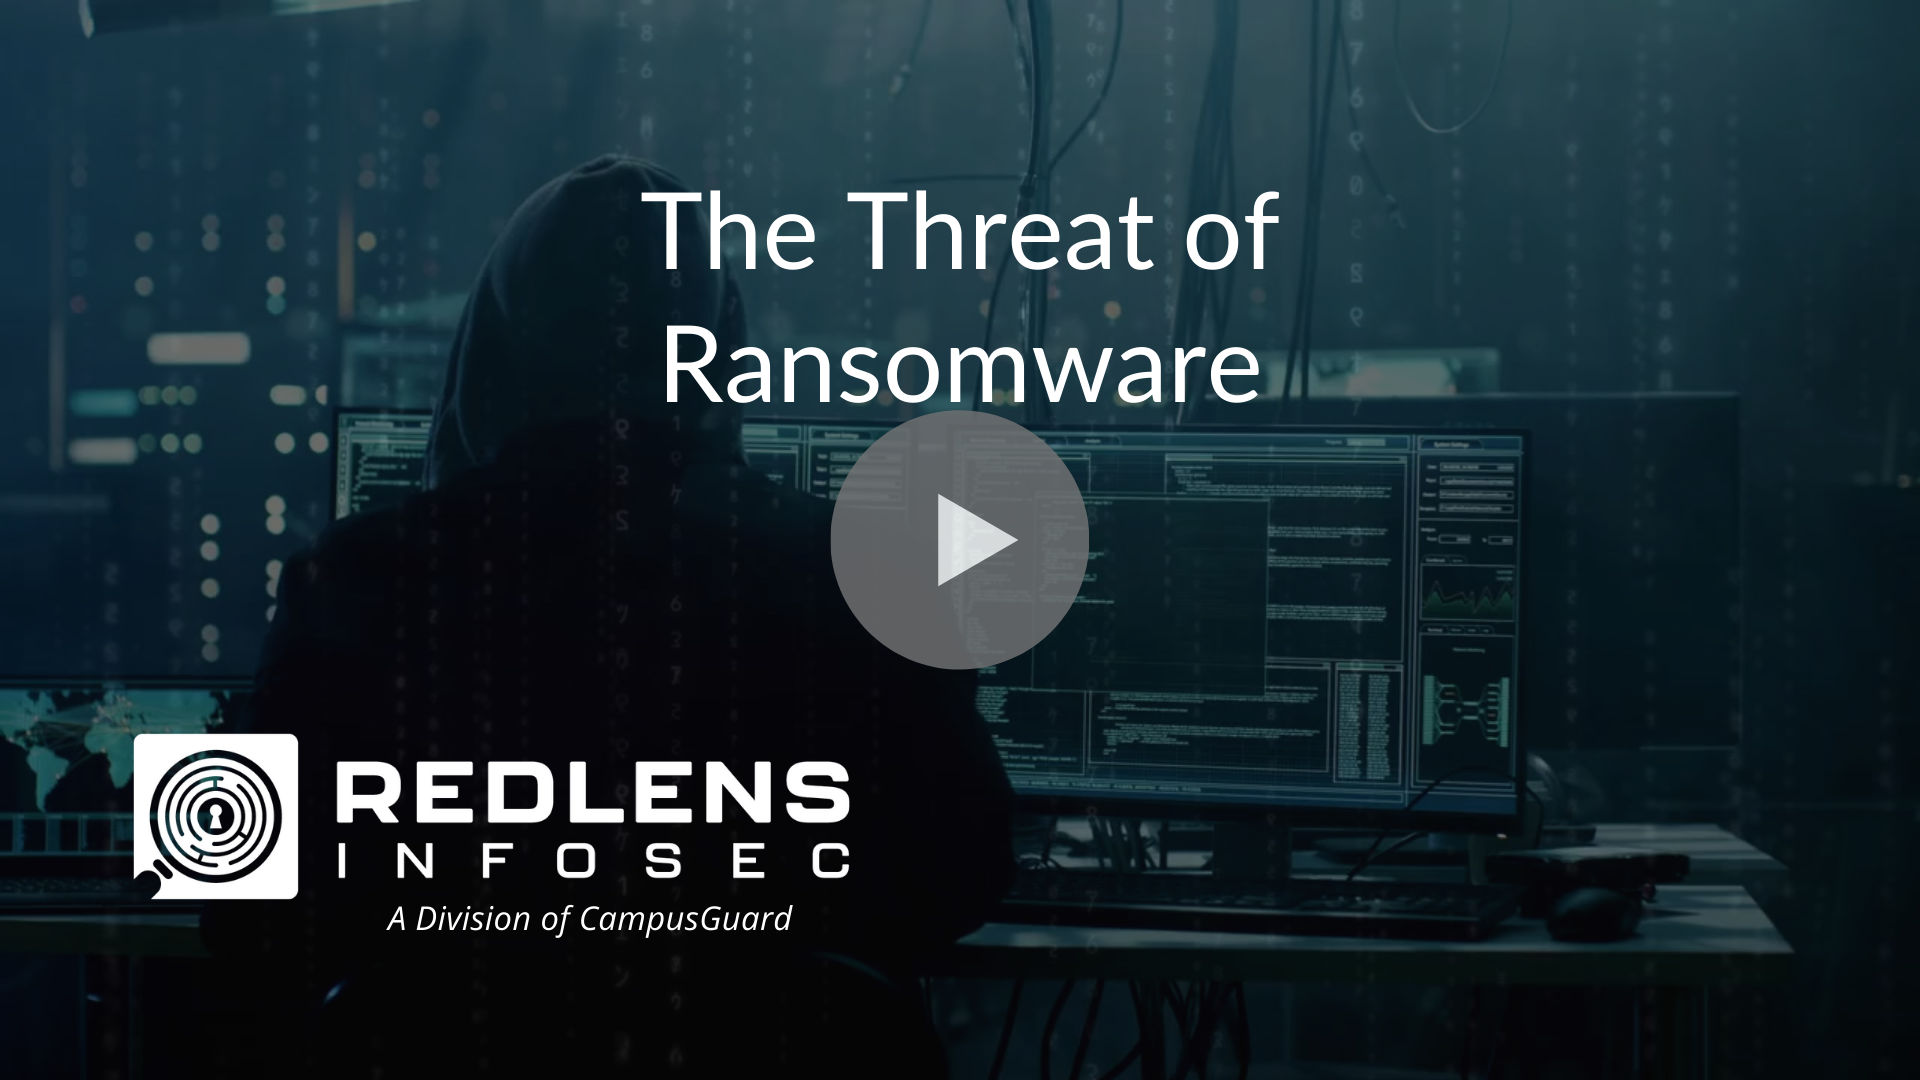 The Threat of Ransomware video